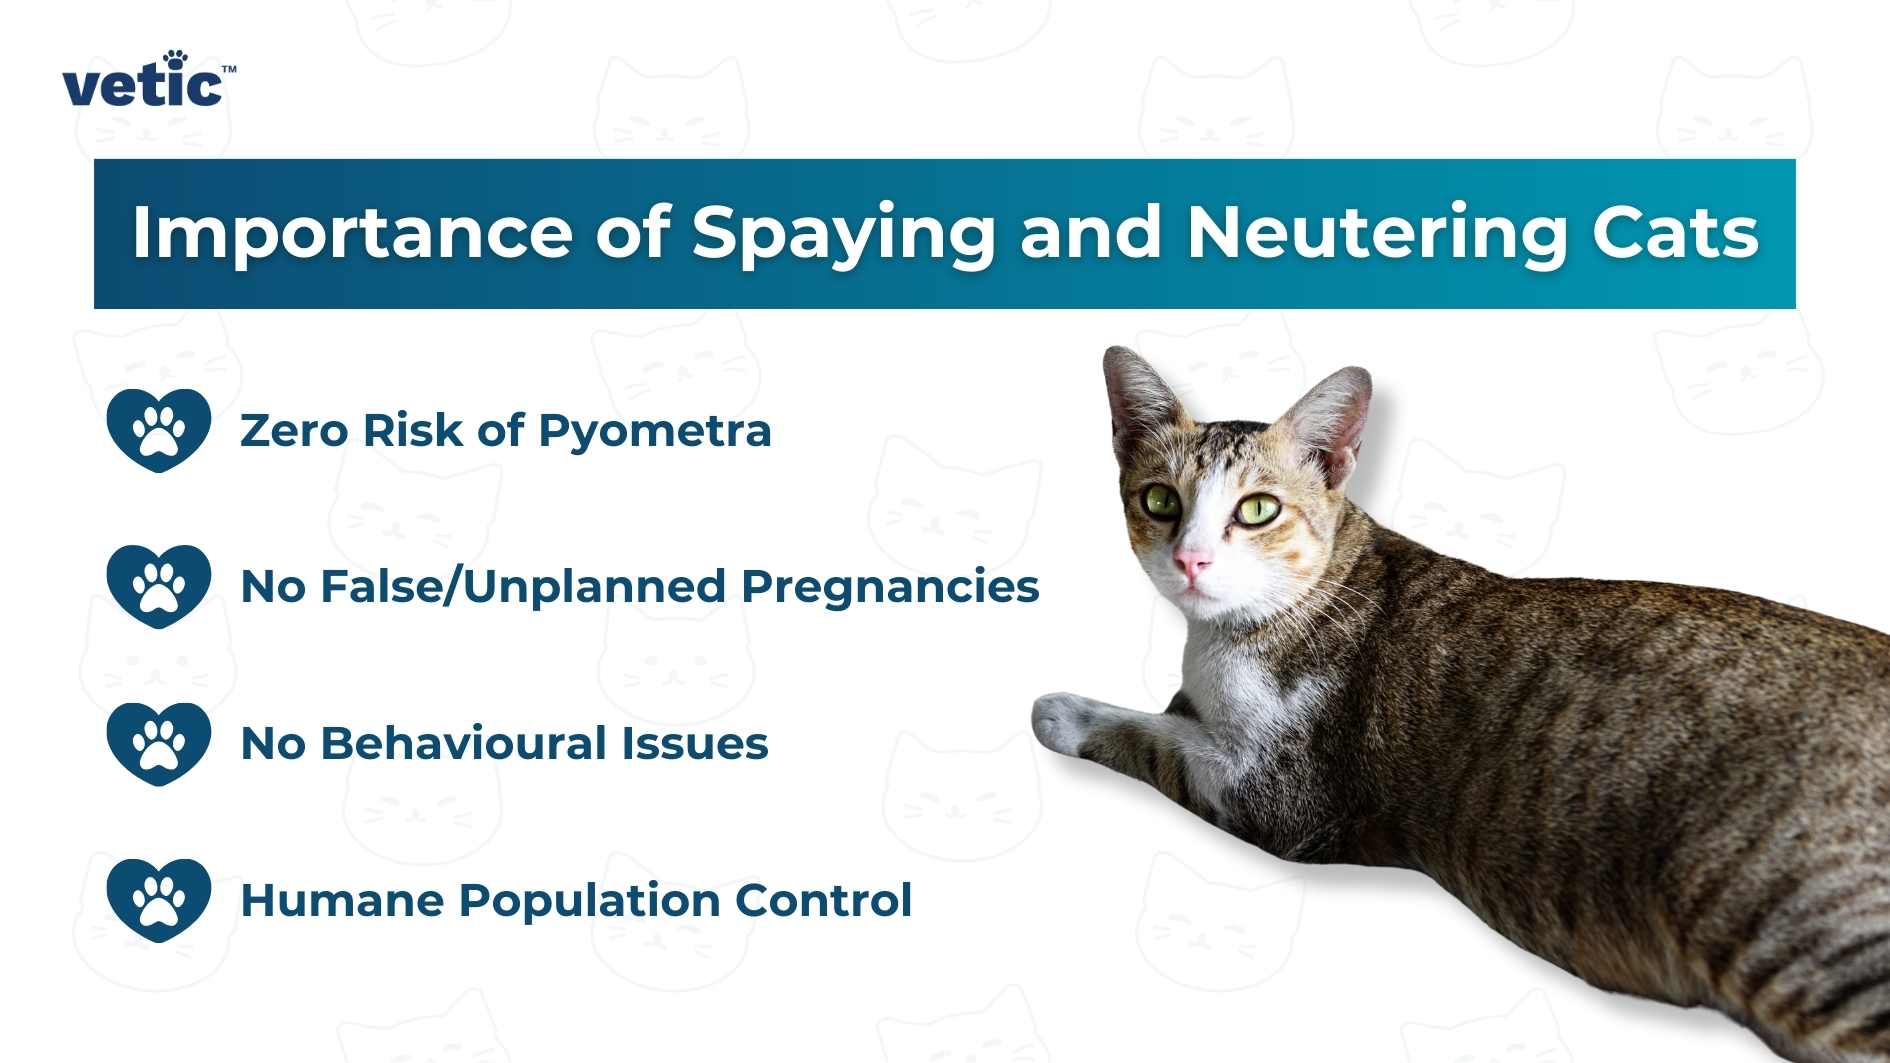 The image is an informational graphic created by “vetic” that highlights the importance of spaying and neutering cats. It features a cat with its face obscured on the right side. The background is white with blue accents and includes cat icons. Four benefits of spaying/neutering are listed with check marks: zero risk of pyometra, no false/unplanned pregnancies, no behavioural issues, and humane population control. This image provides information on the benefits of spaying and neutering cats to promote animal welfare and population control.